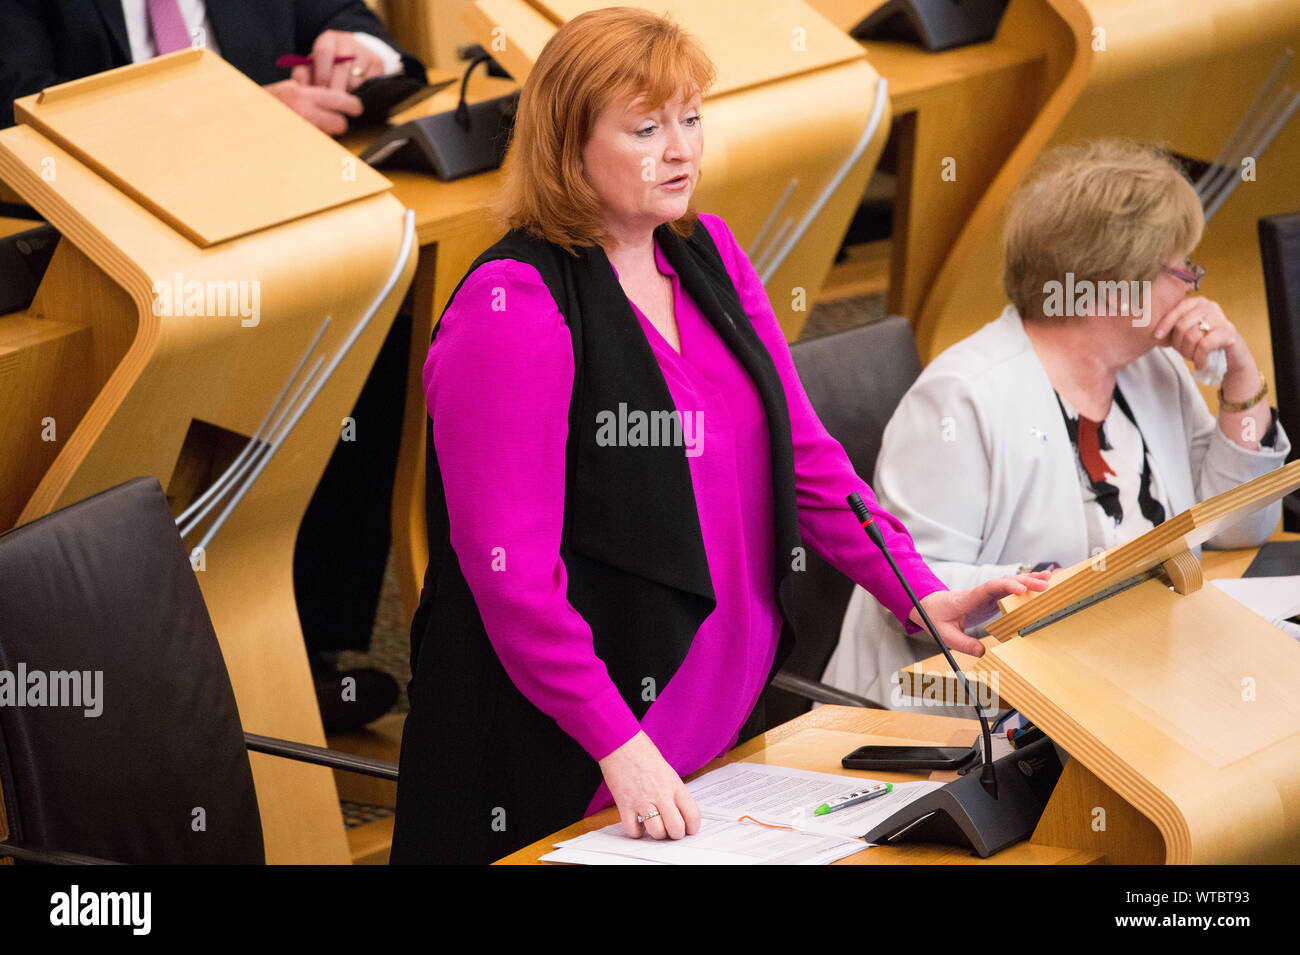 Edinburgh, UK. 5 September 2019. Pictured: Emma Harper MSP for South Scotland. Scottish Government Debate: Avoiding A No Deal Exit From The EU.  That the Parliament agrees that the UK should in no circumstances leave the EU on a no-deal basis, and condemns the Prime Minister’s suspension of the UK Parliament from as early as 9 September until 14 October 2019. The result of the division is: For 87, Against 28, Abstentions 0. Colin Fisher/CDFIMAGES.COM Stock Photo